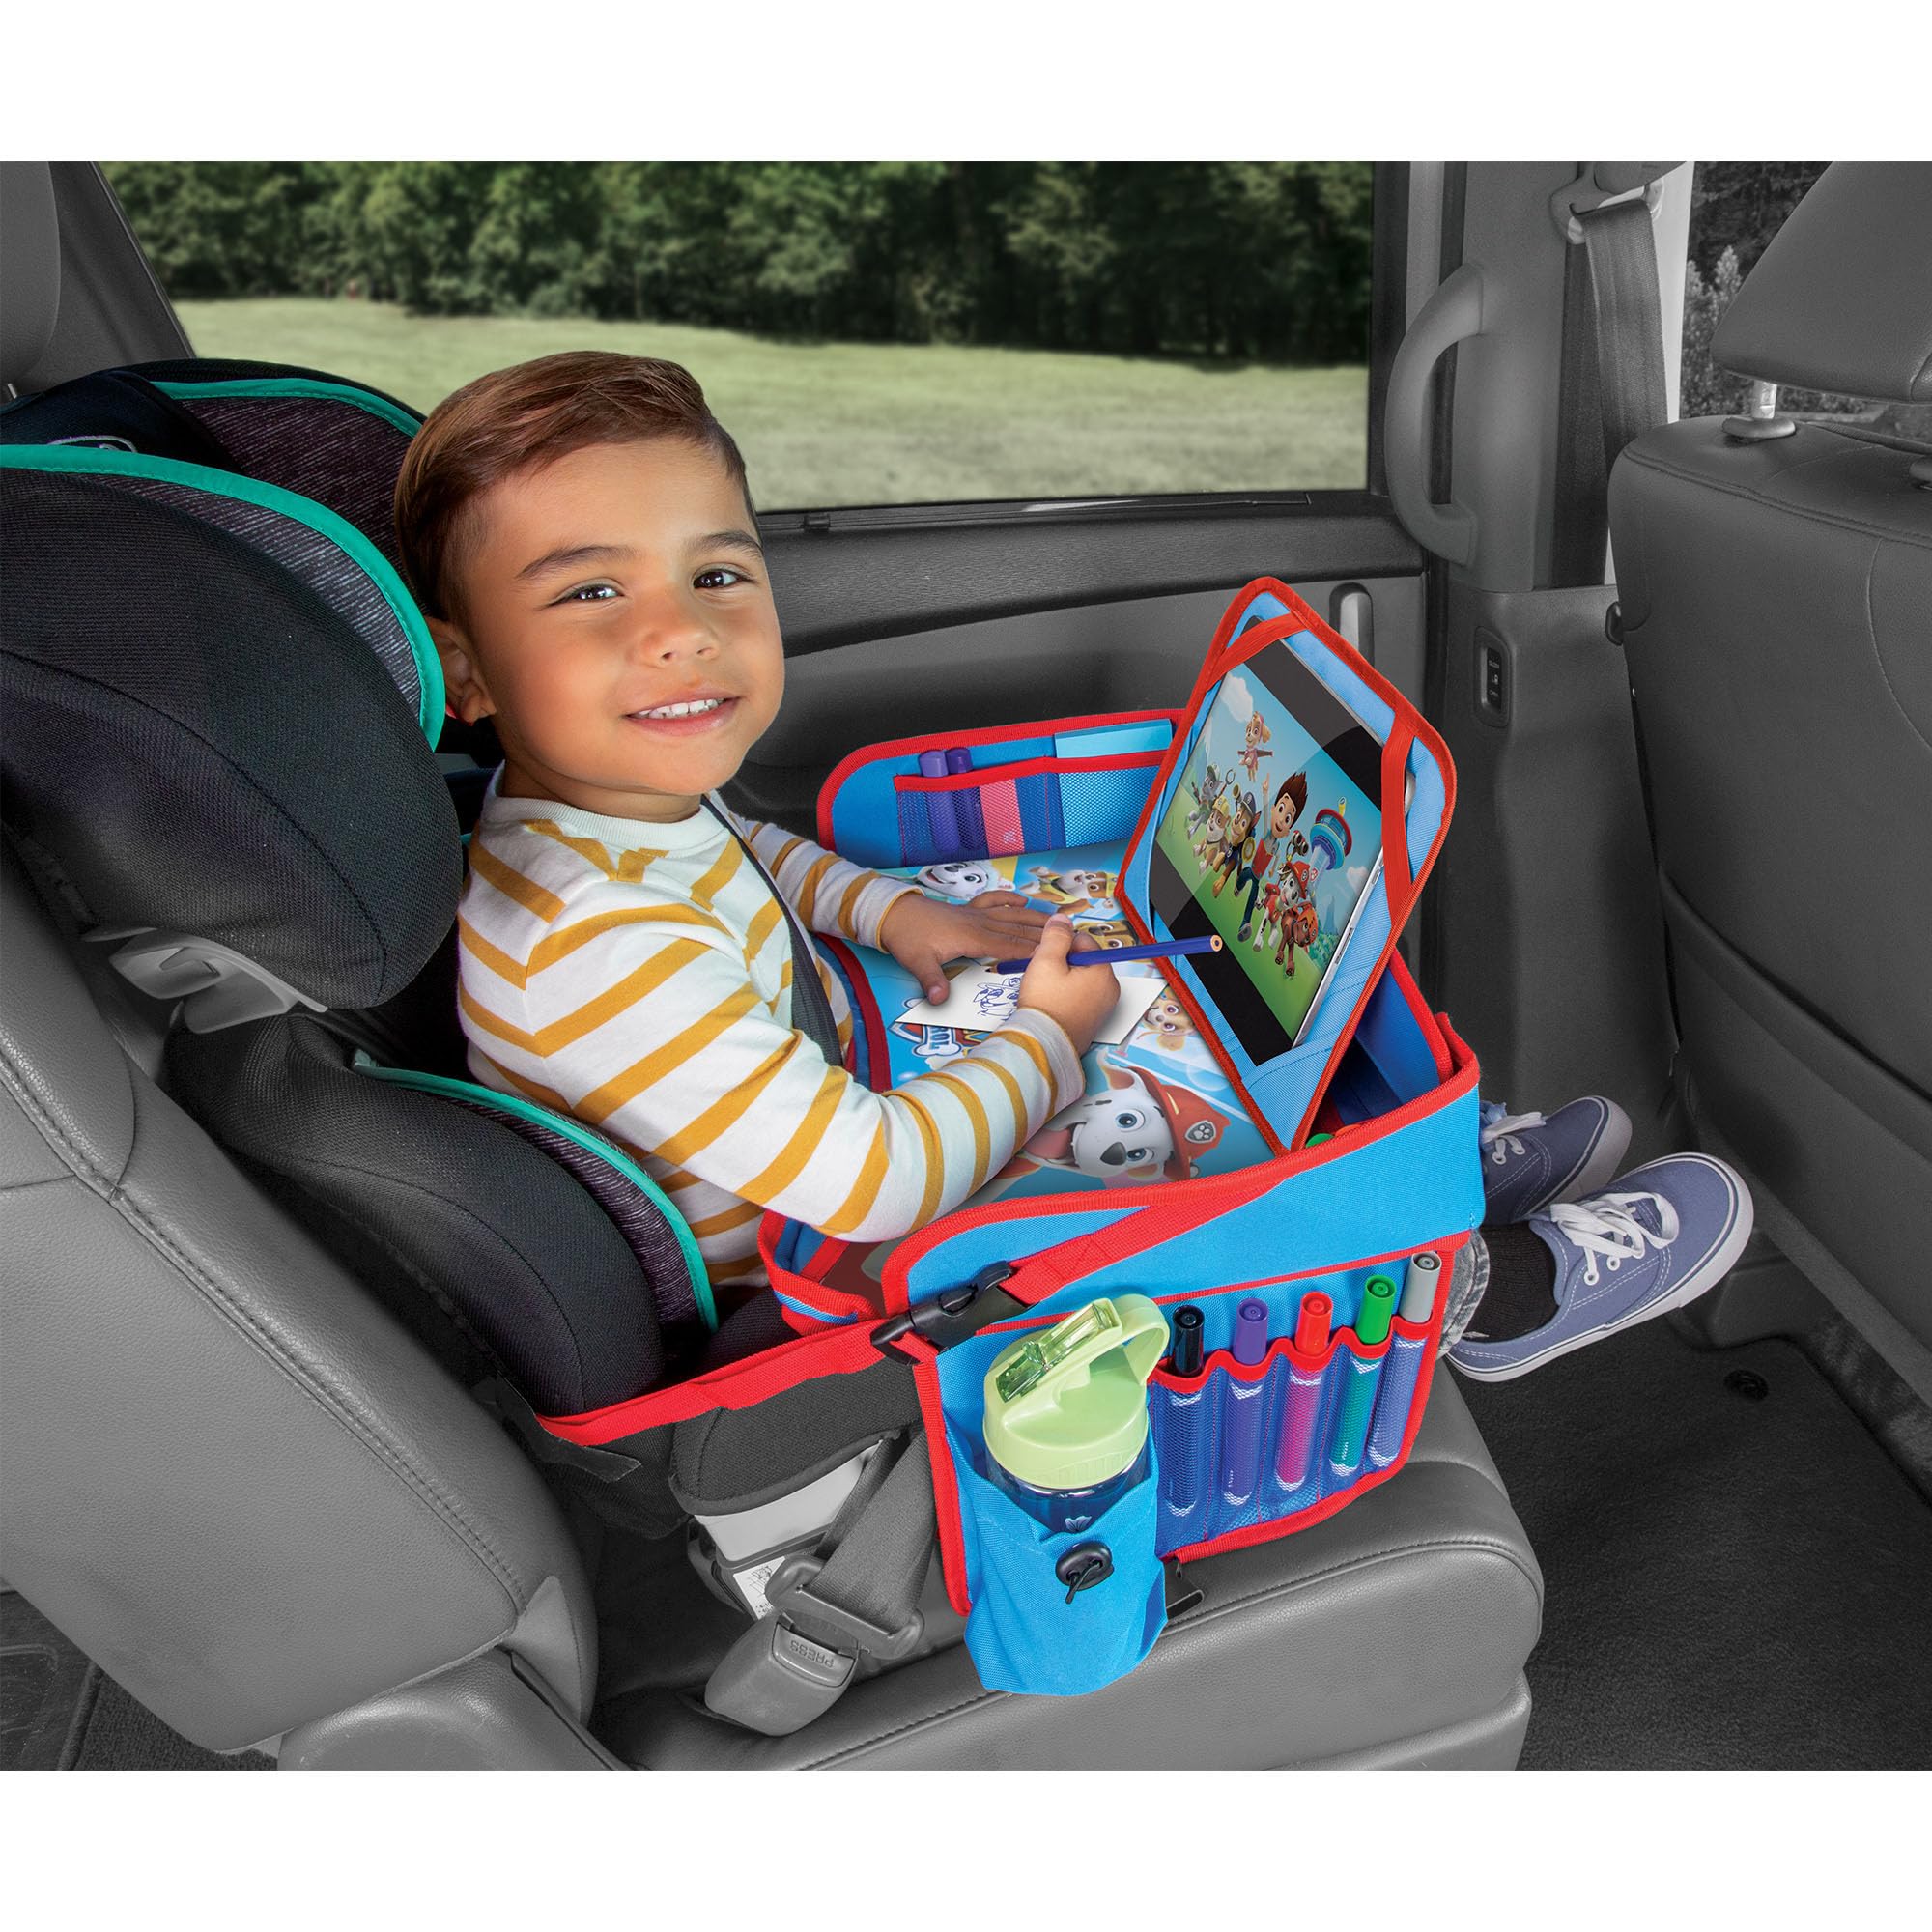 Paw Patrol Kids Travel Tray for Car, Toddler Car Seat Tray for Travel, Car Trays for Kids Road Trip Essentials & Activities with iPad and Water Bottle Holders